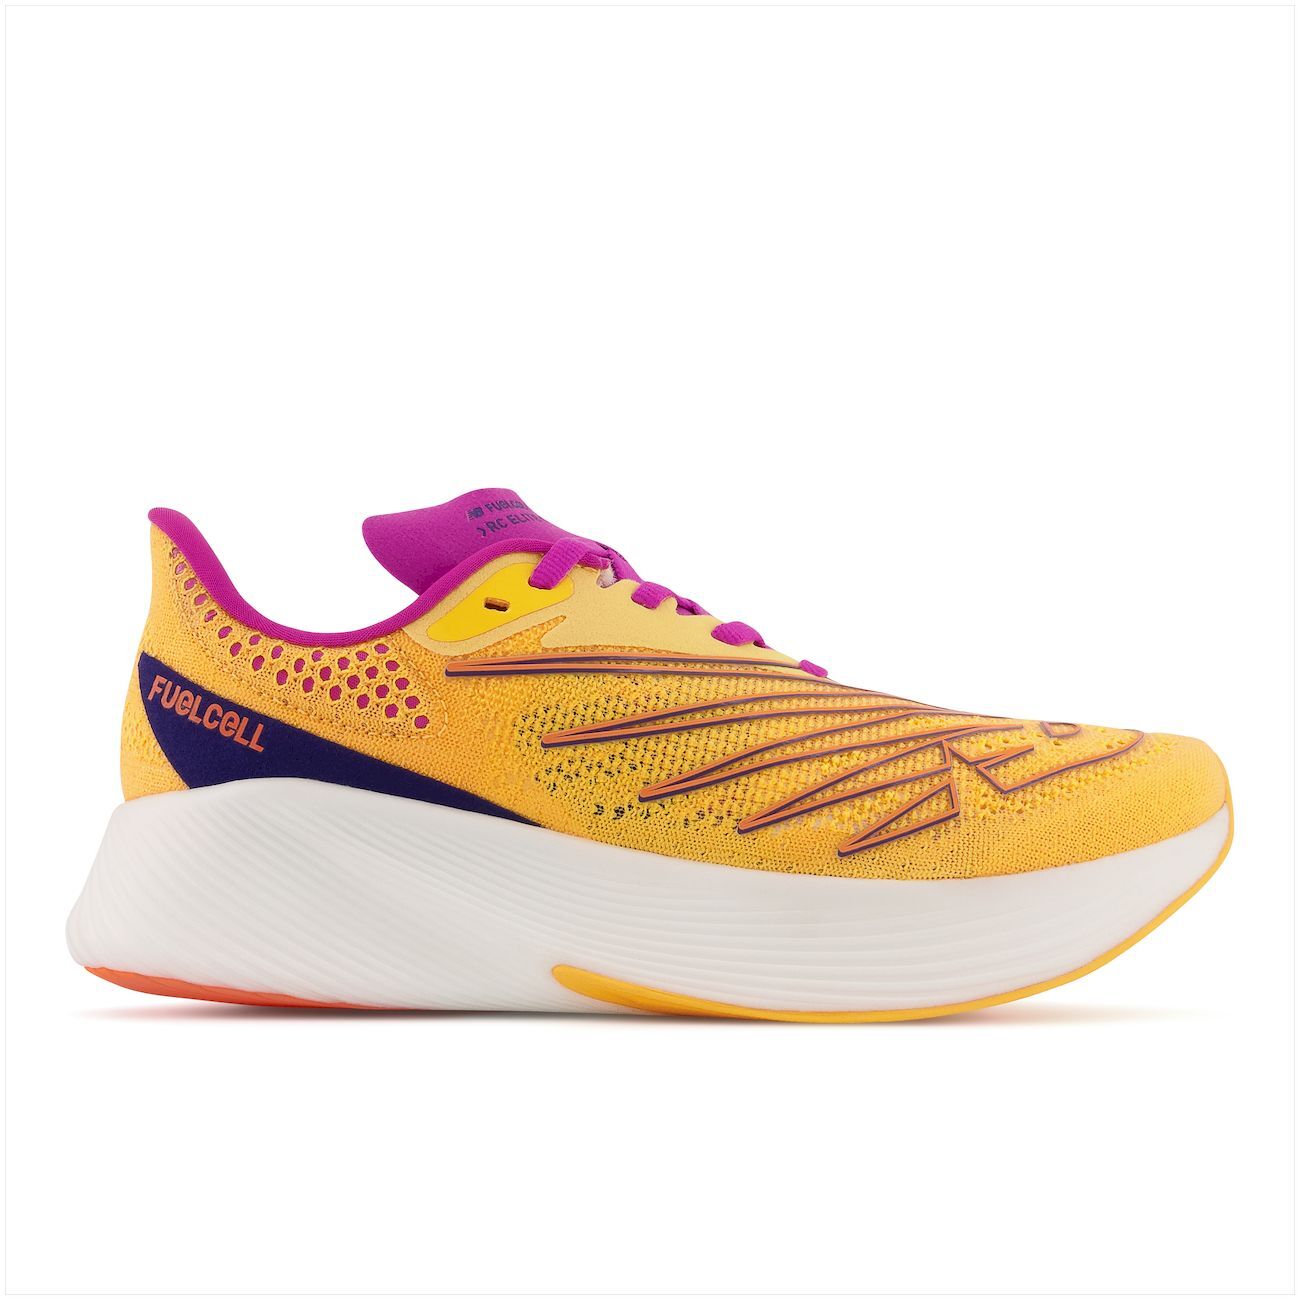 New Balance Fuelcell RC Elite V2 - Running shoes - Women's